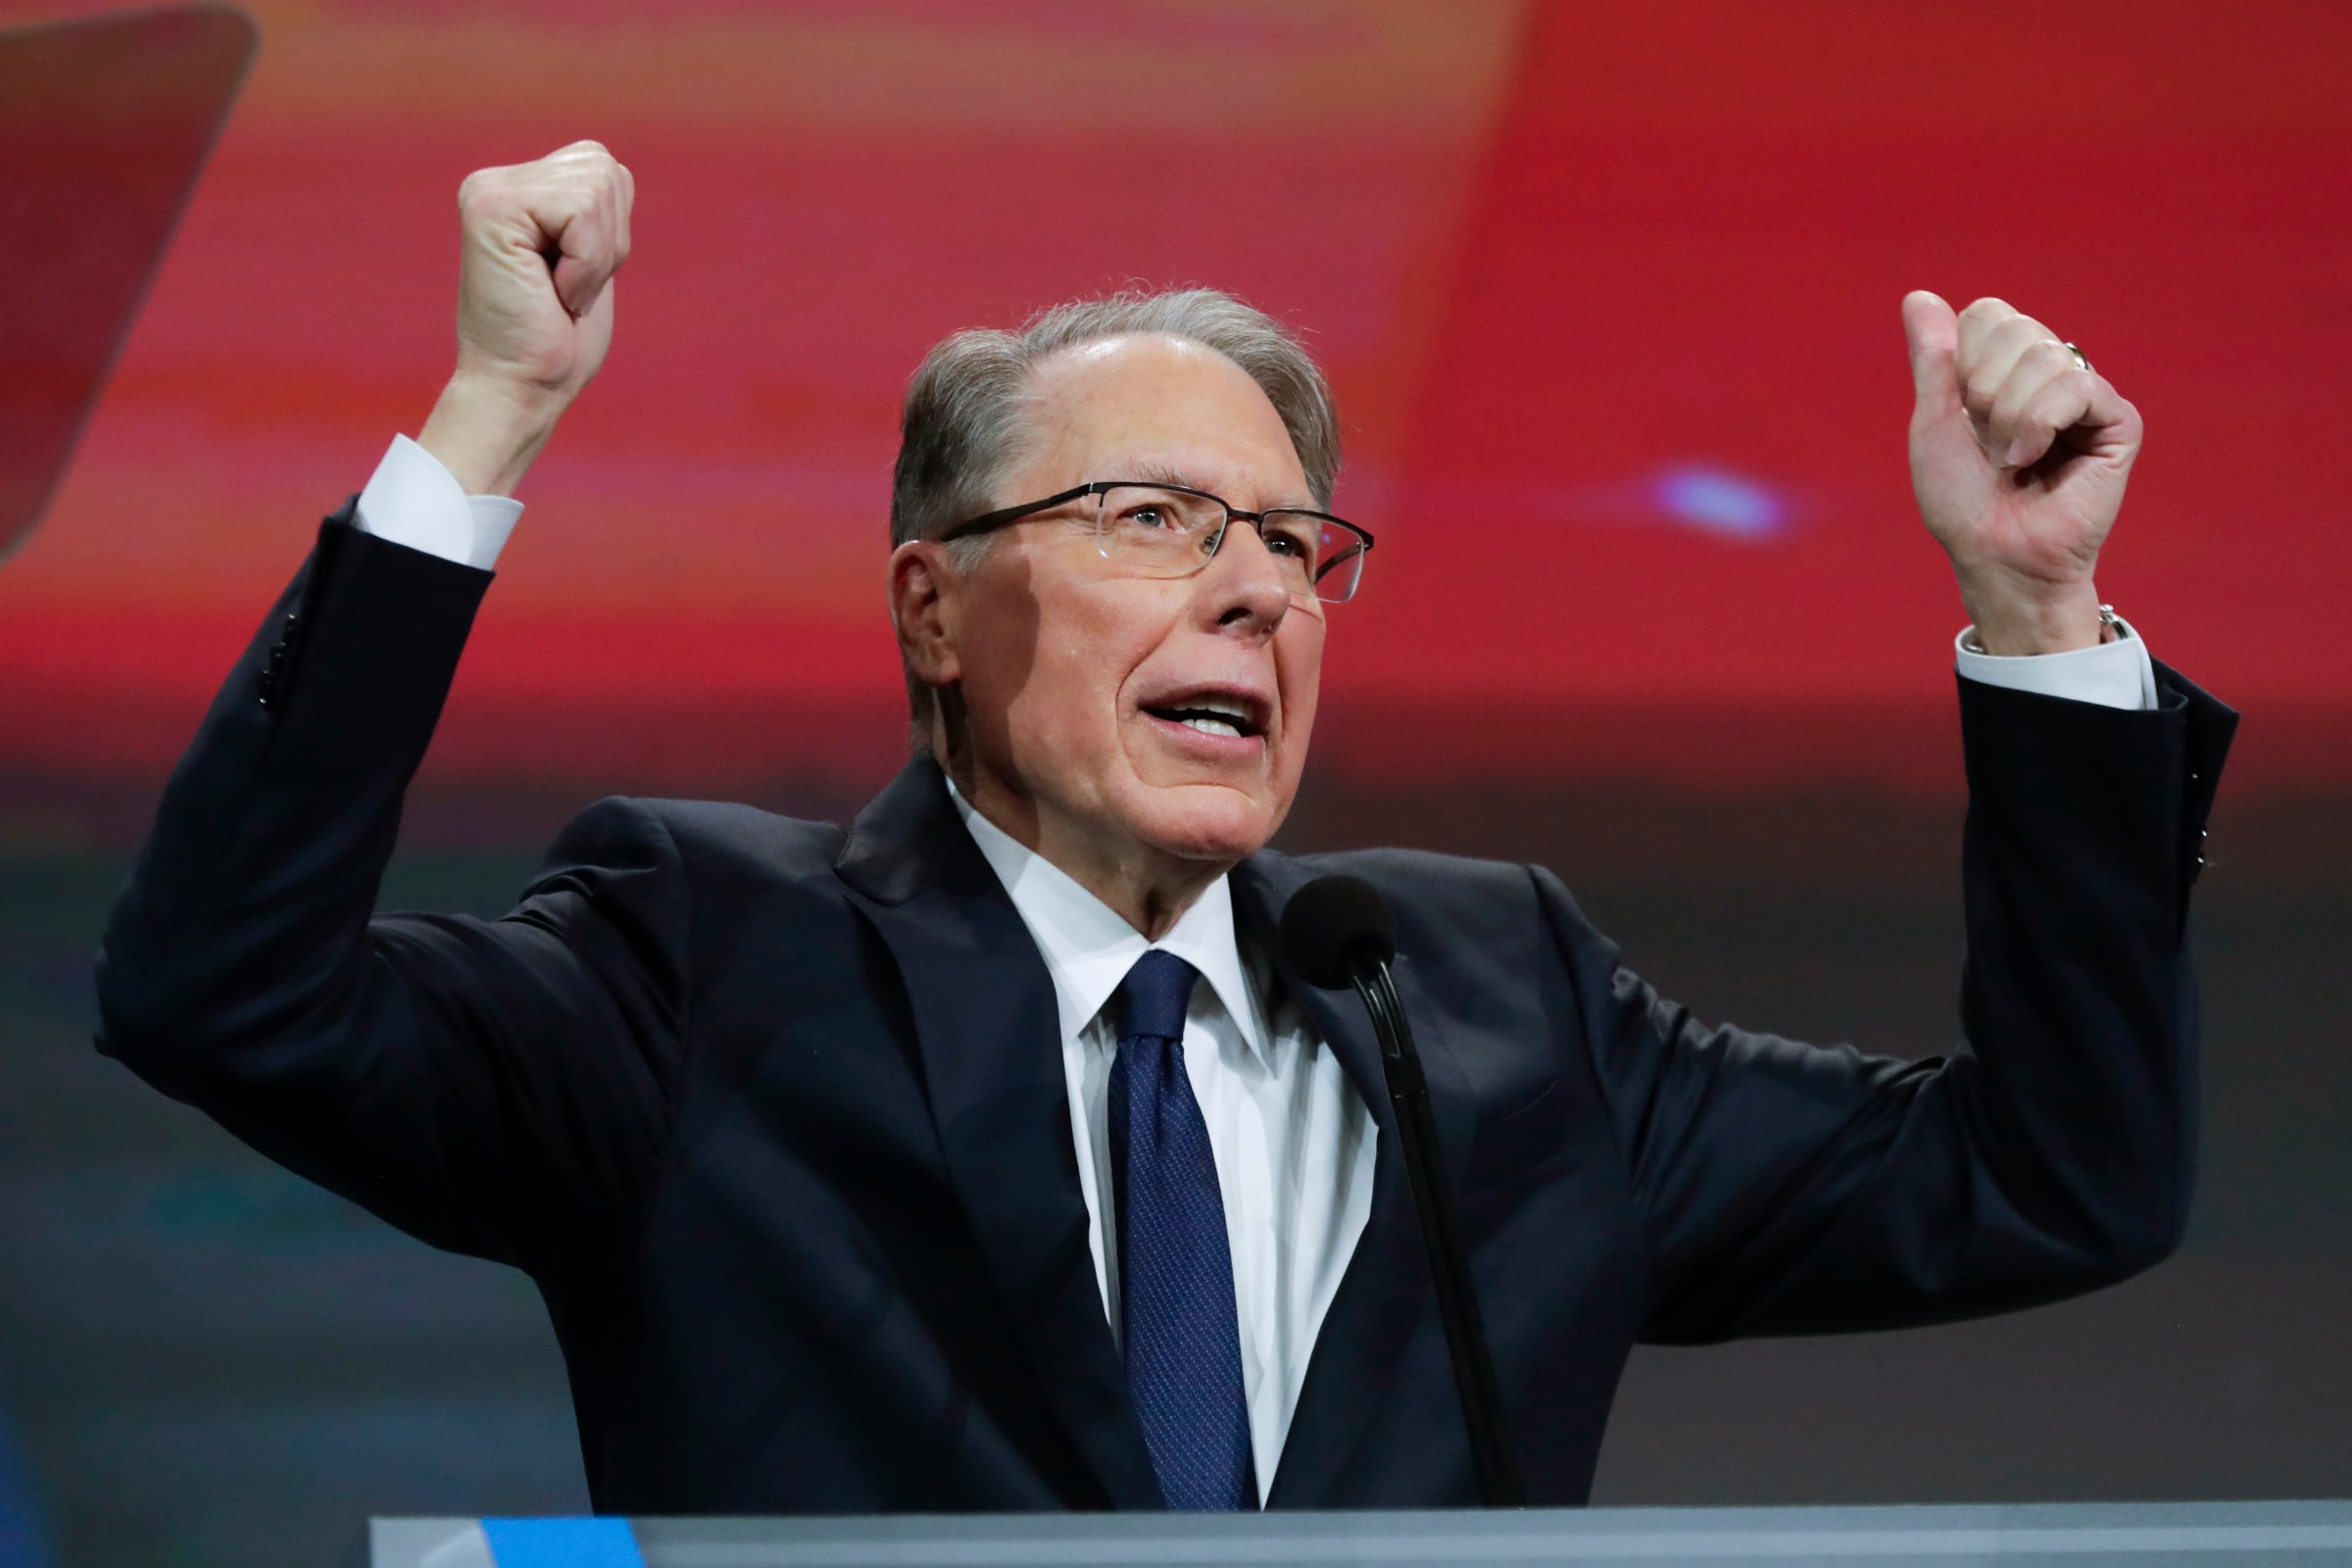 The NRA sued its longtime public relations firm, accusing it of engineering a failed “coup” attempt to undermine the NRA's leadership.